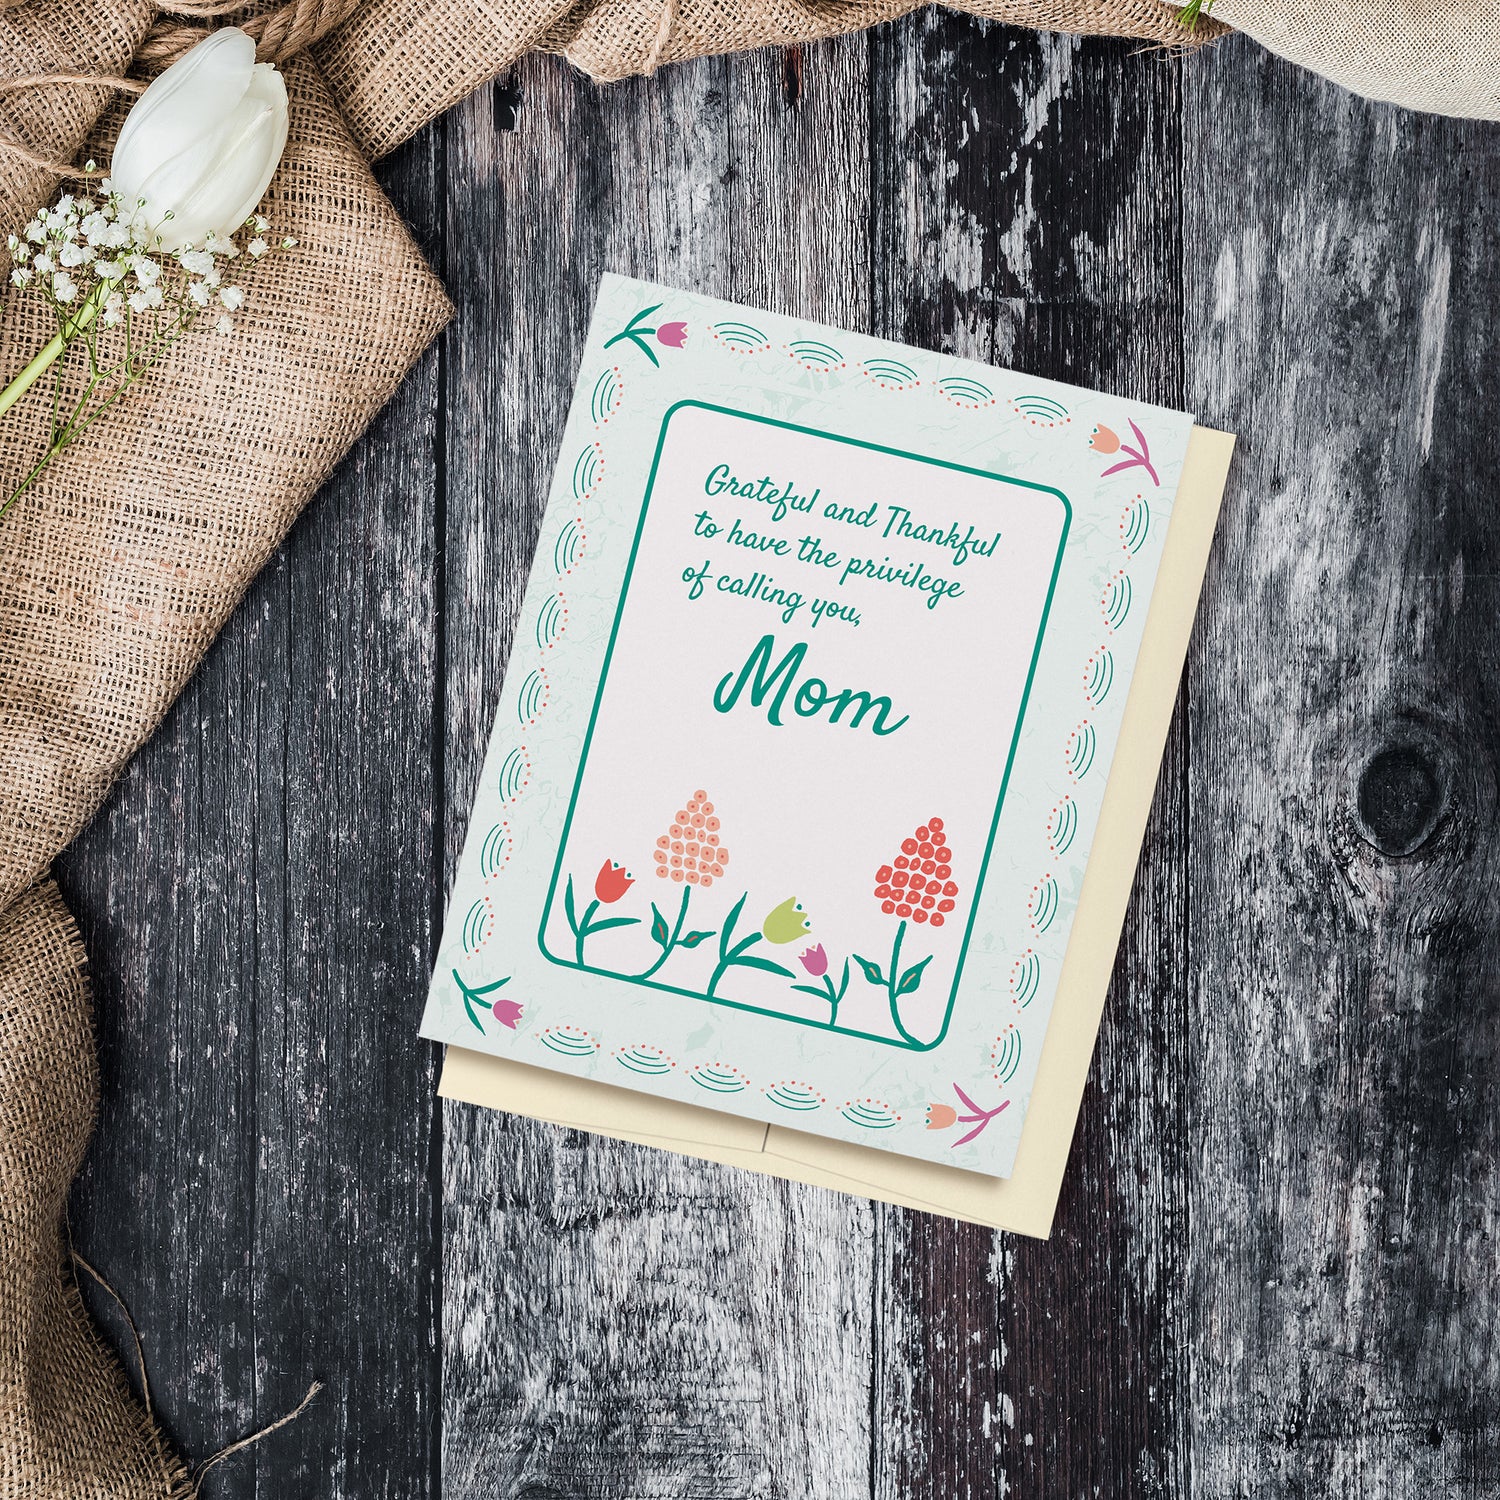 Grateful and thankful to have the privilege of calling you, Mom, greeting card displayed on a wood background surrounded by flowers and fabric.